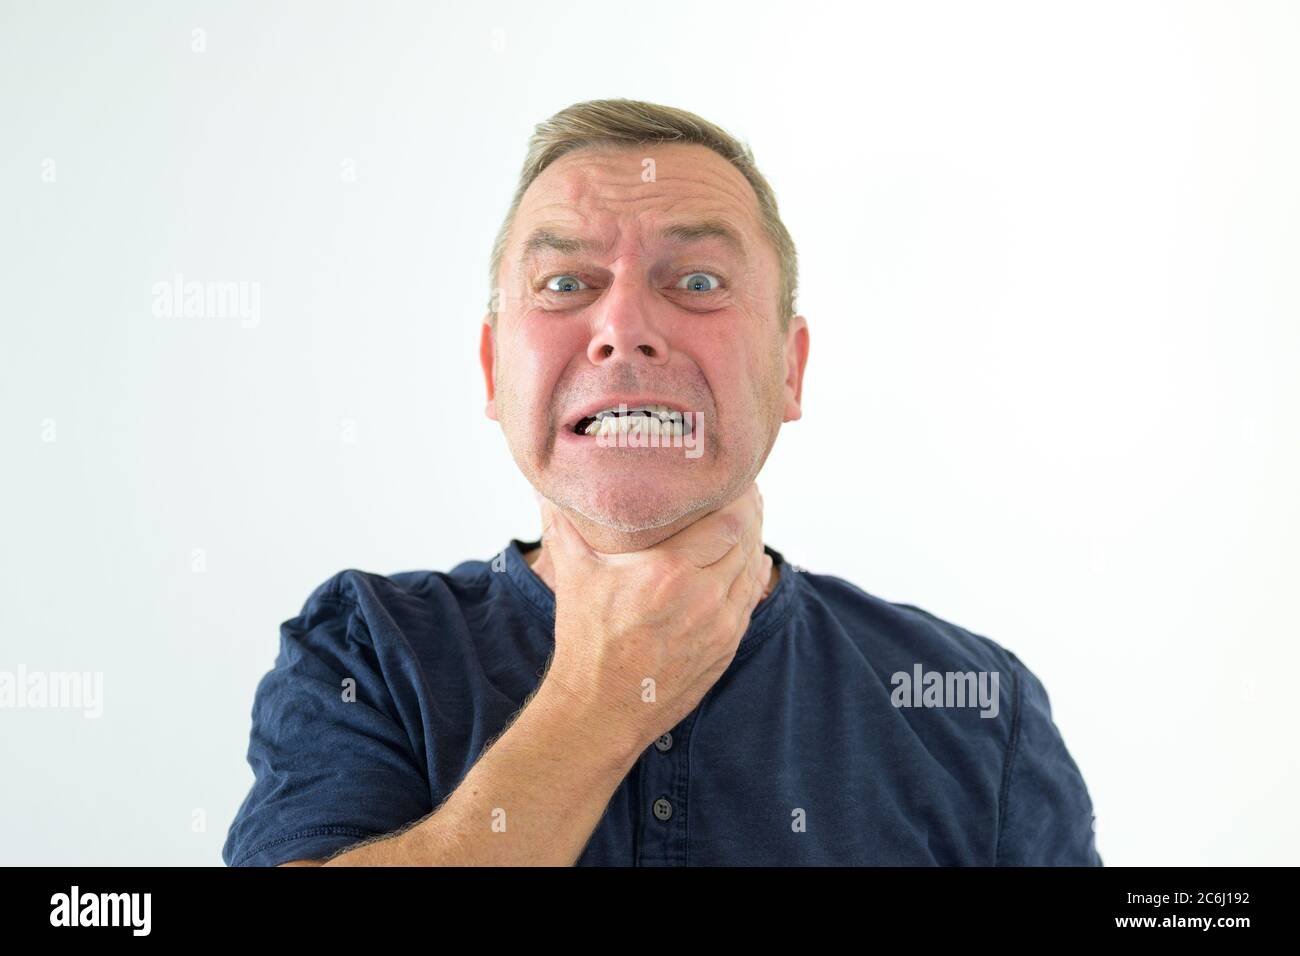 Angry frustrated man grabbing at his throat while gnashing his teeth and glaring at the camera in a head and shoulders portrait on white Stock Photo